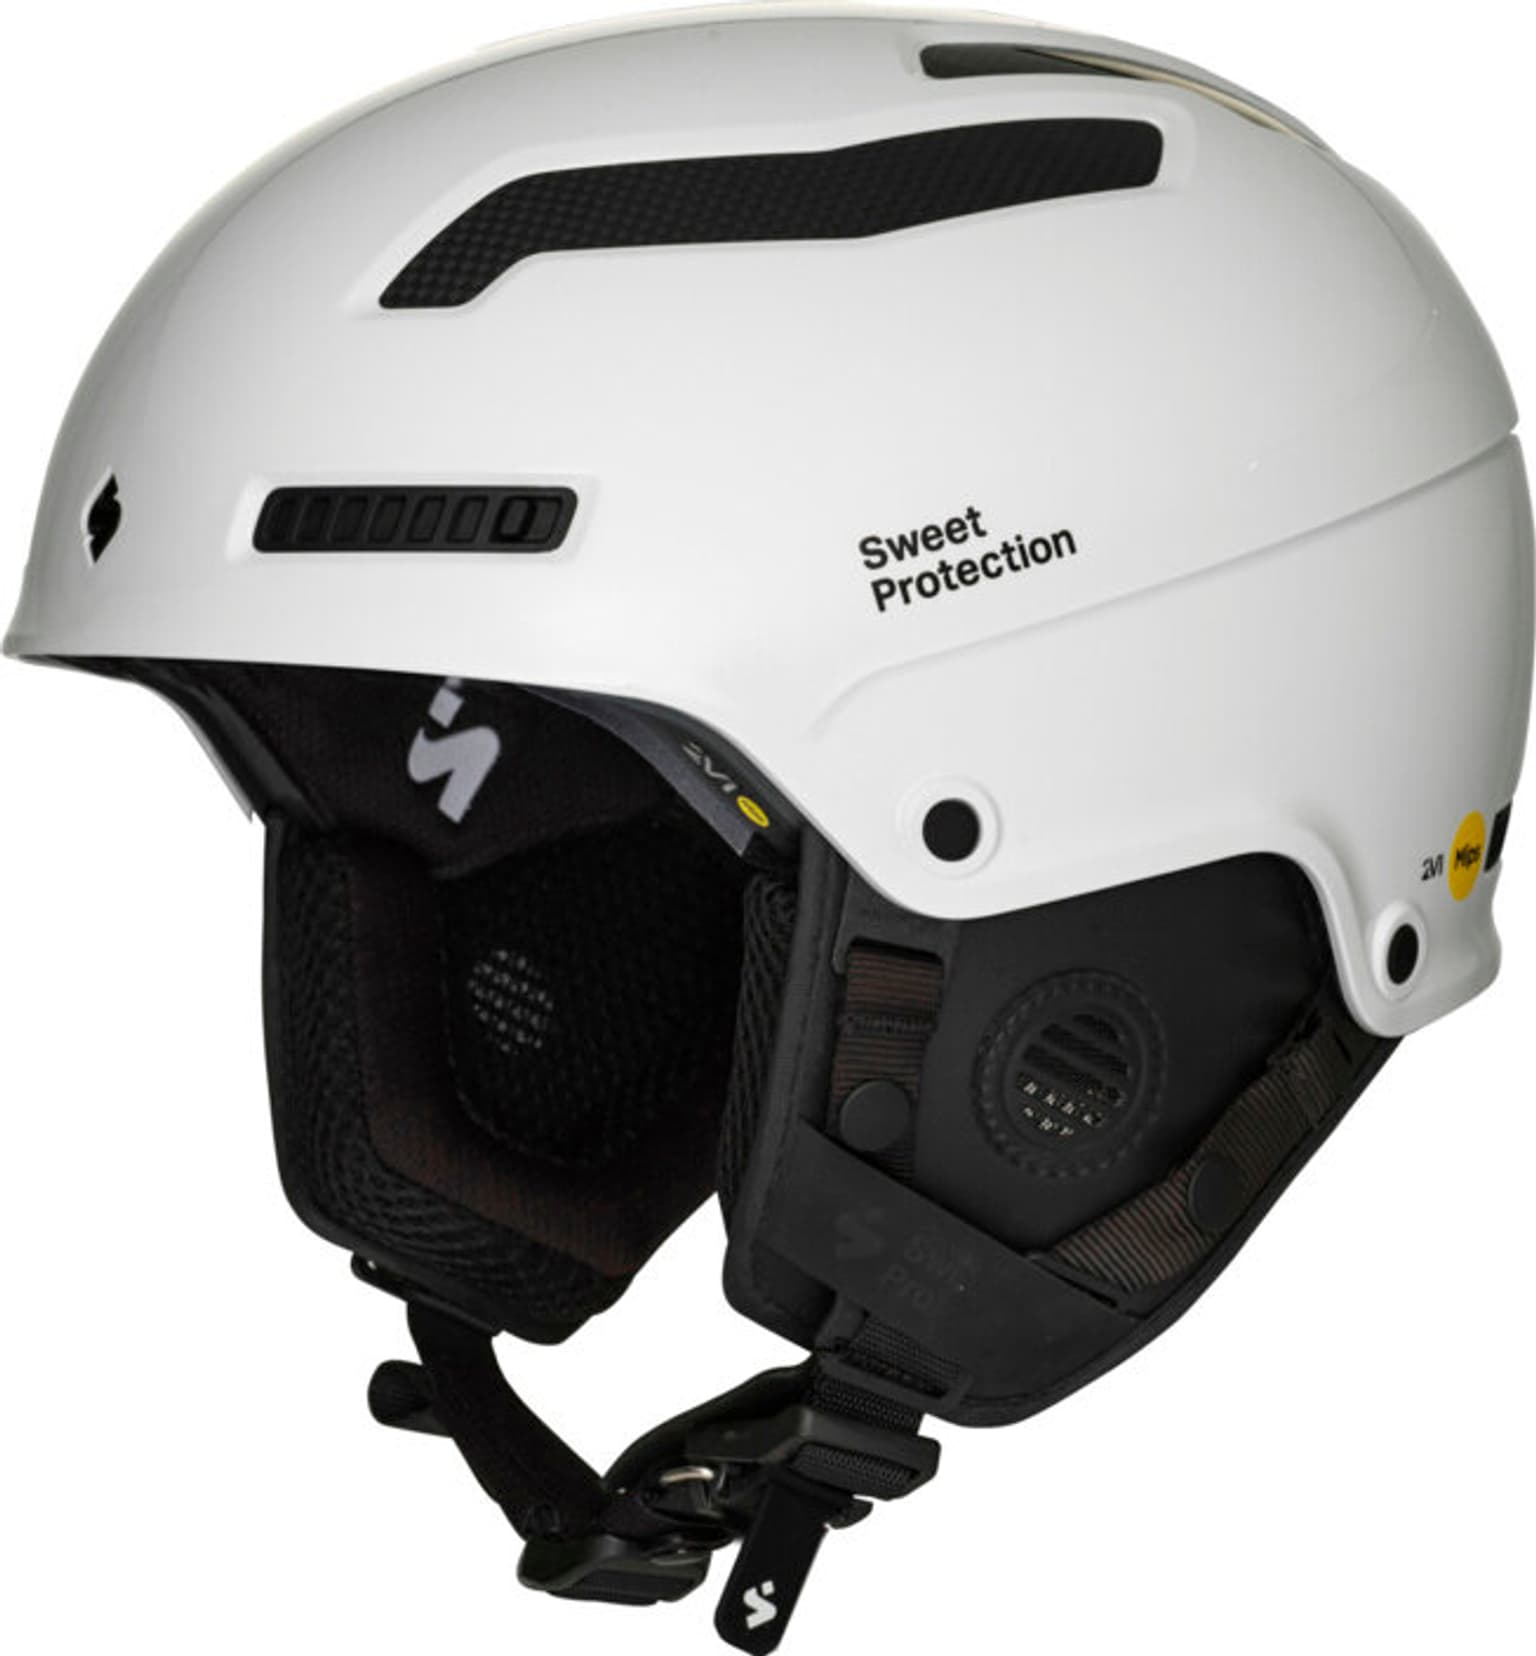 Sweet Protection Sweet Protection Trooper 2Vi Mips Skihelm weiss 1